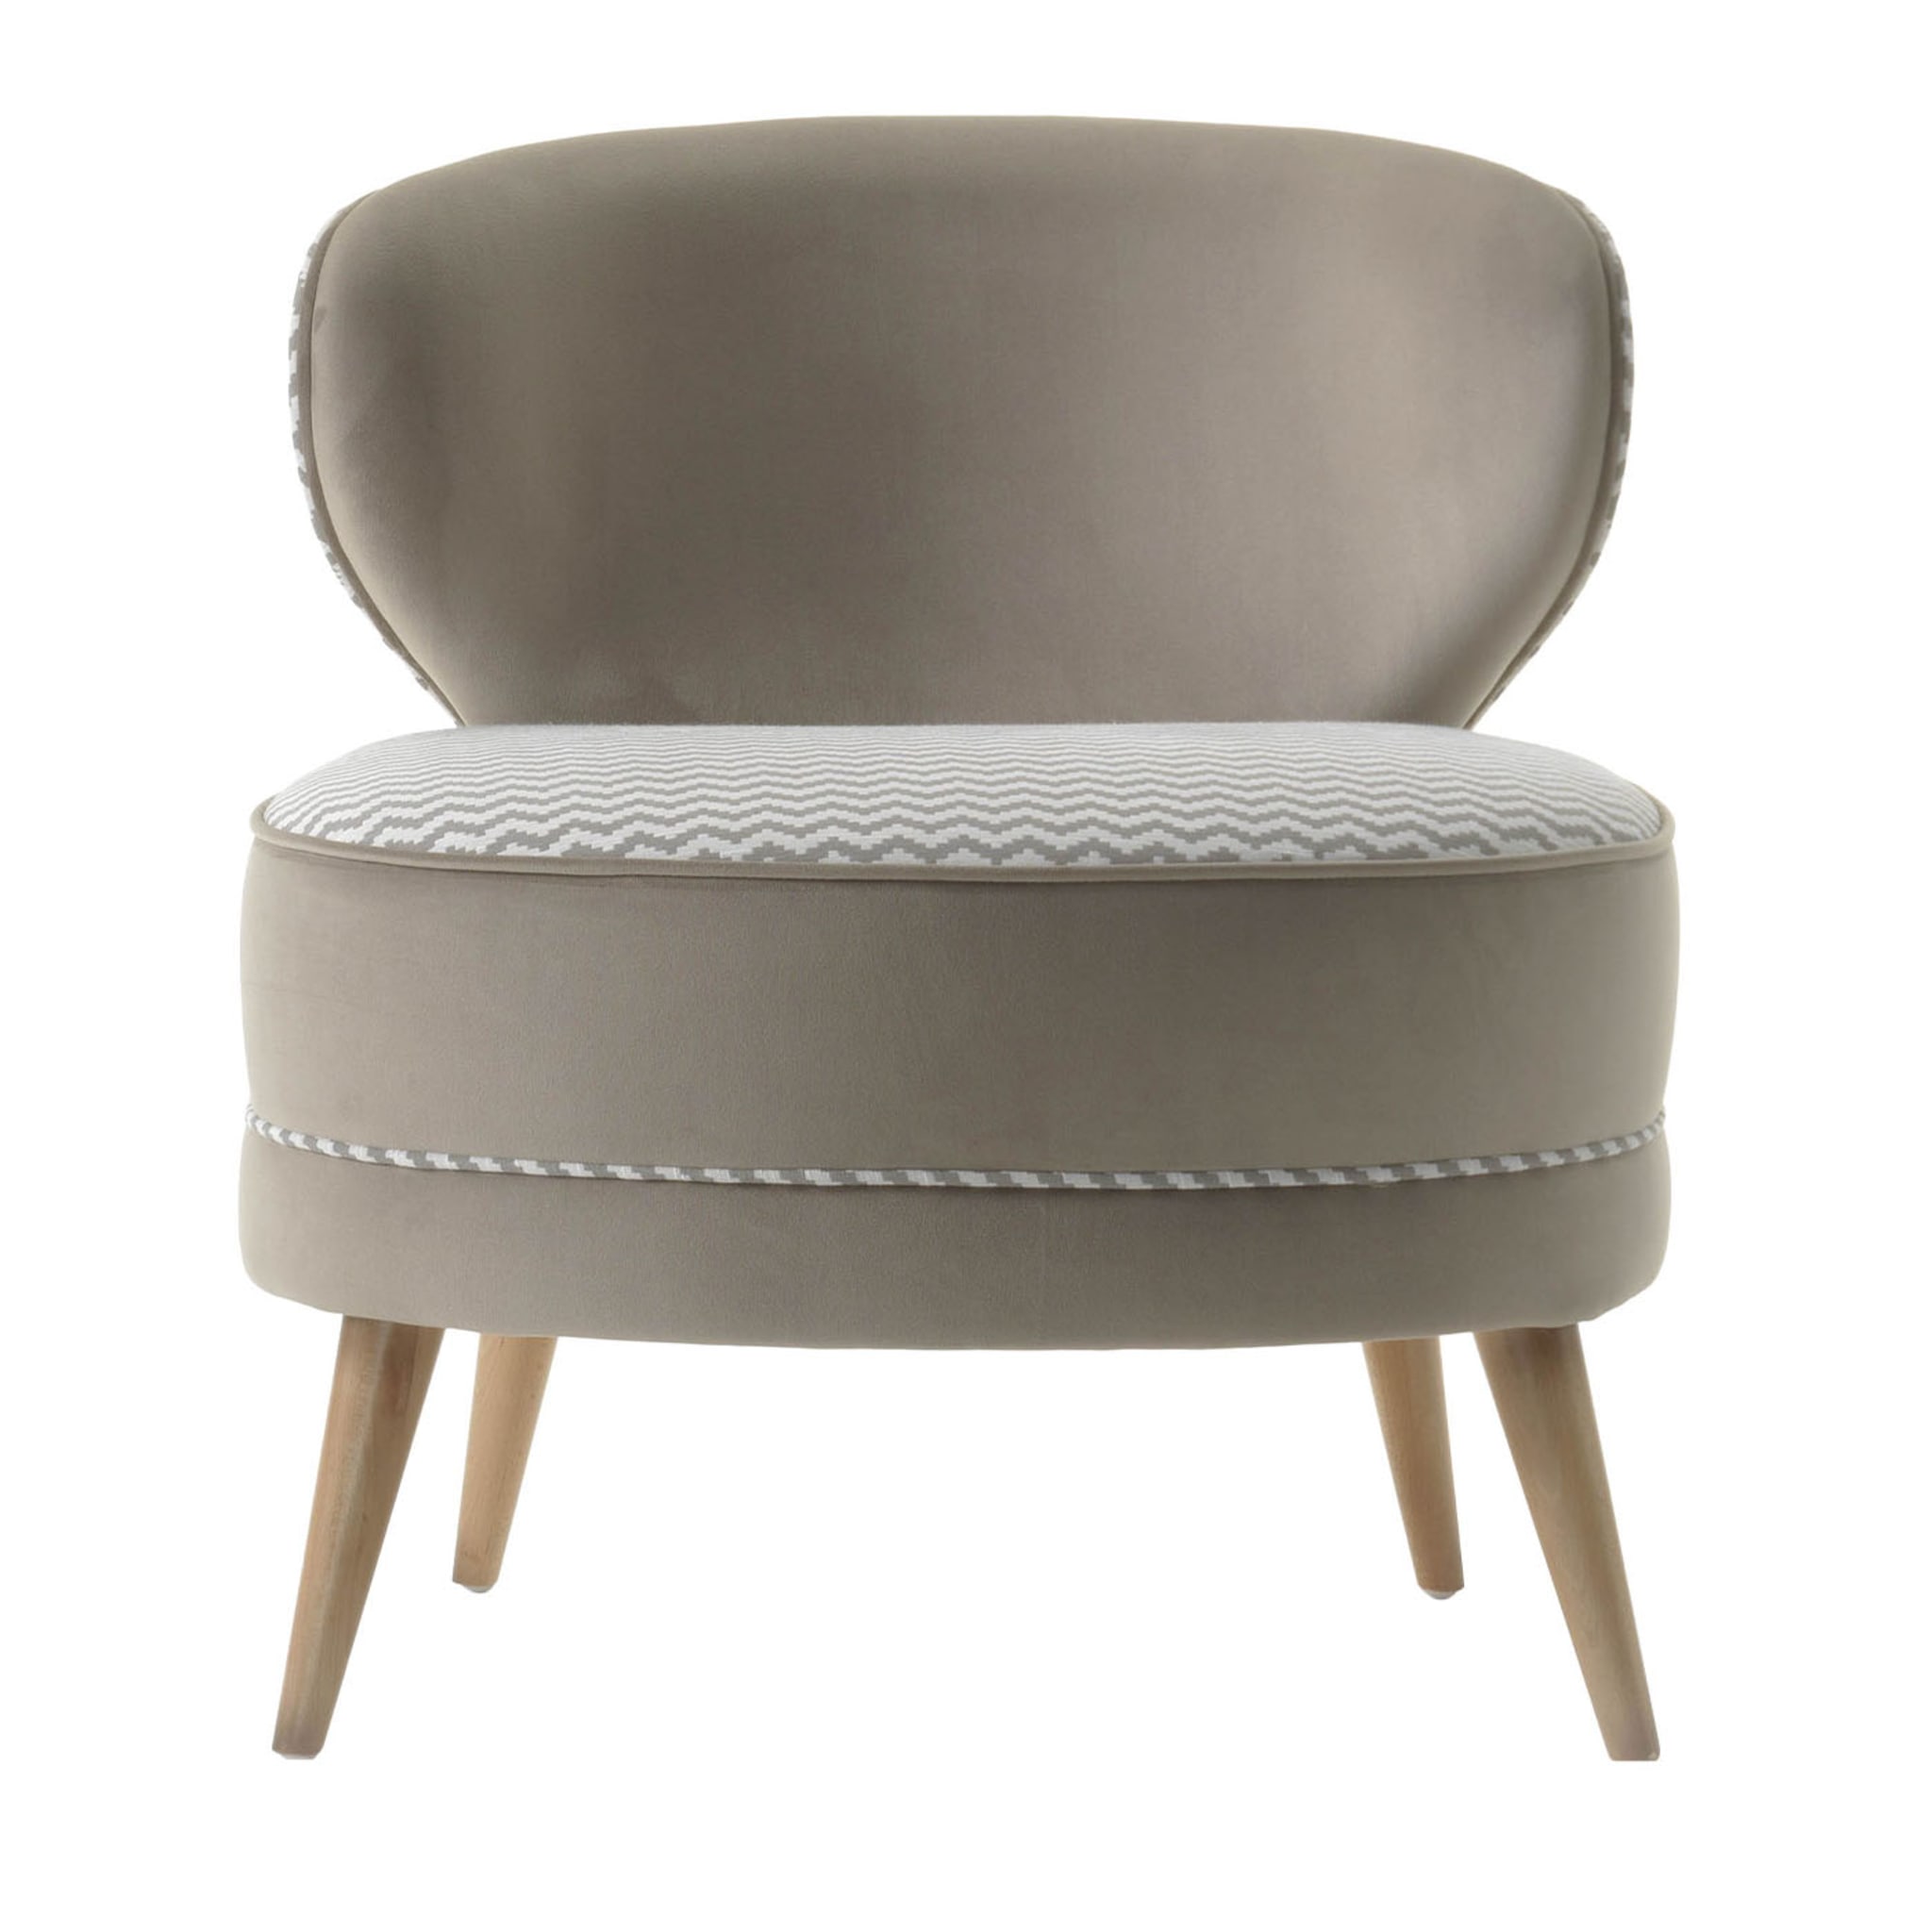 Perugia Taupe Lounge Chair - Main view